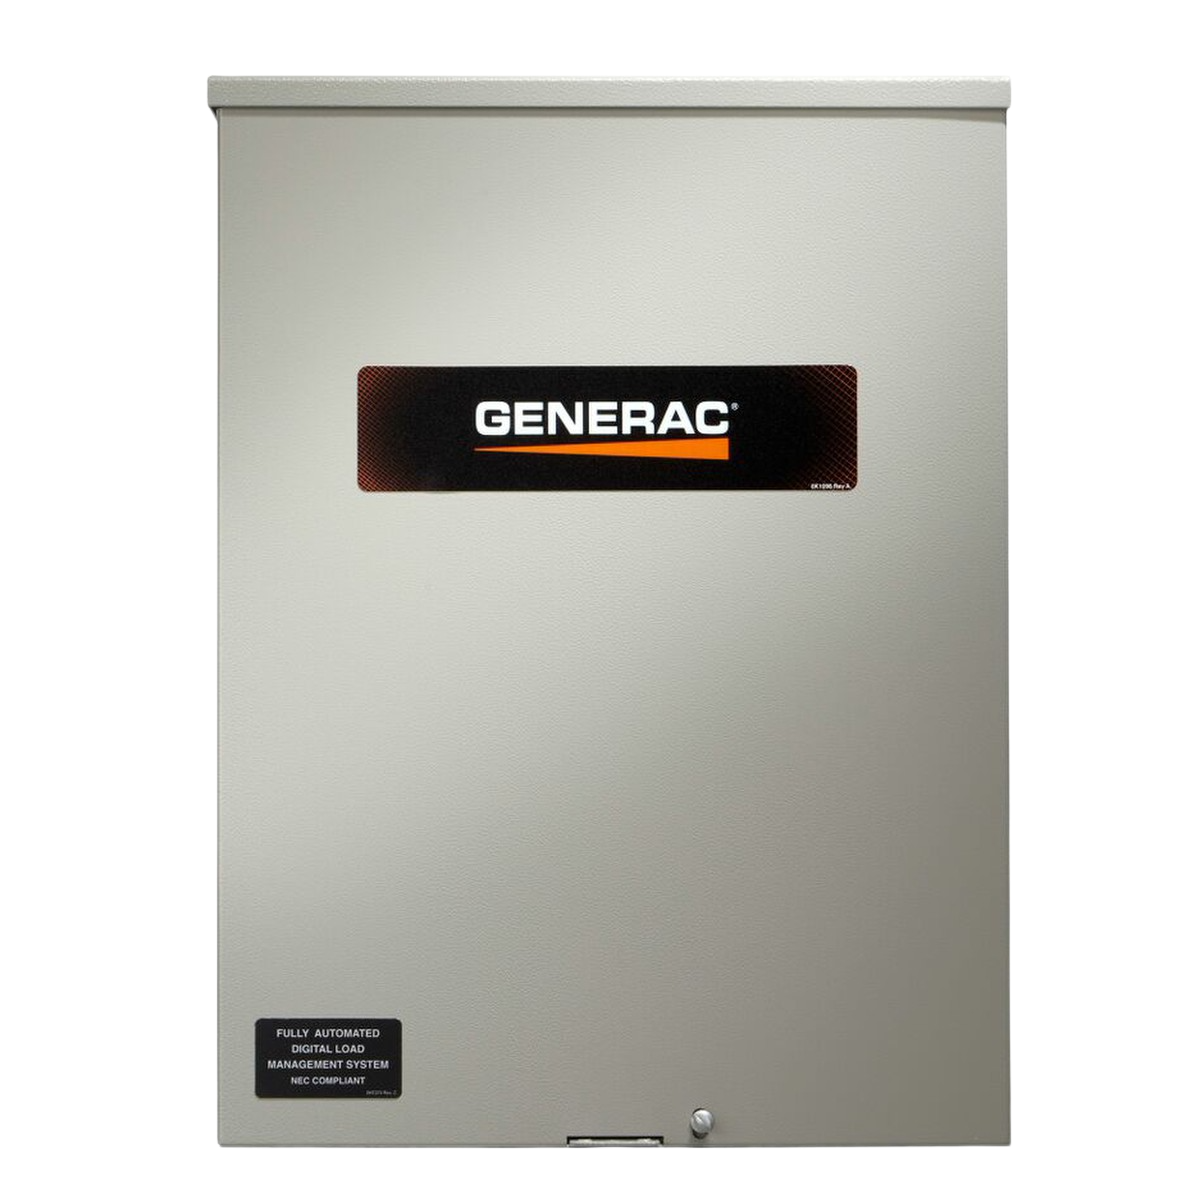 Generac RTSW400A3 400 Amp Service Entrance Rated Single Phase Automatic Transfer Switch New